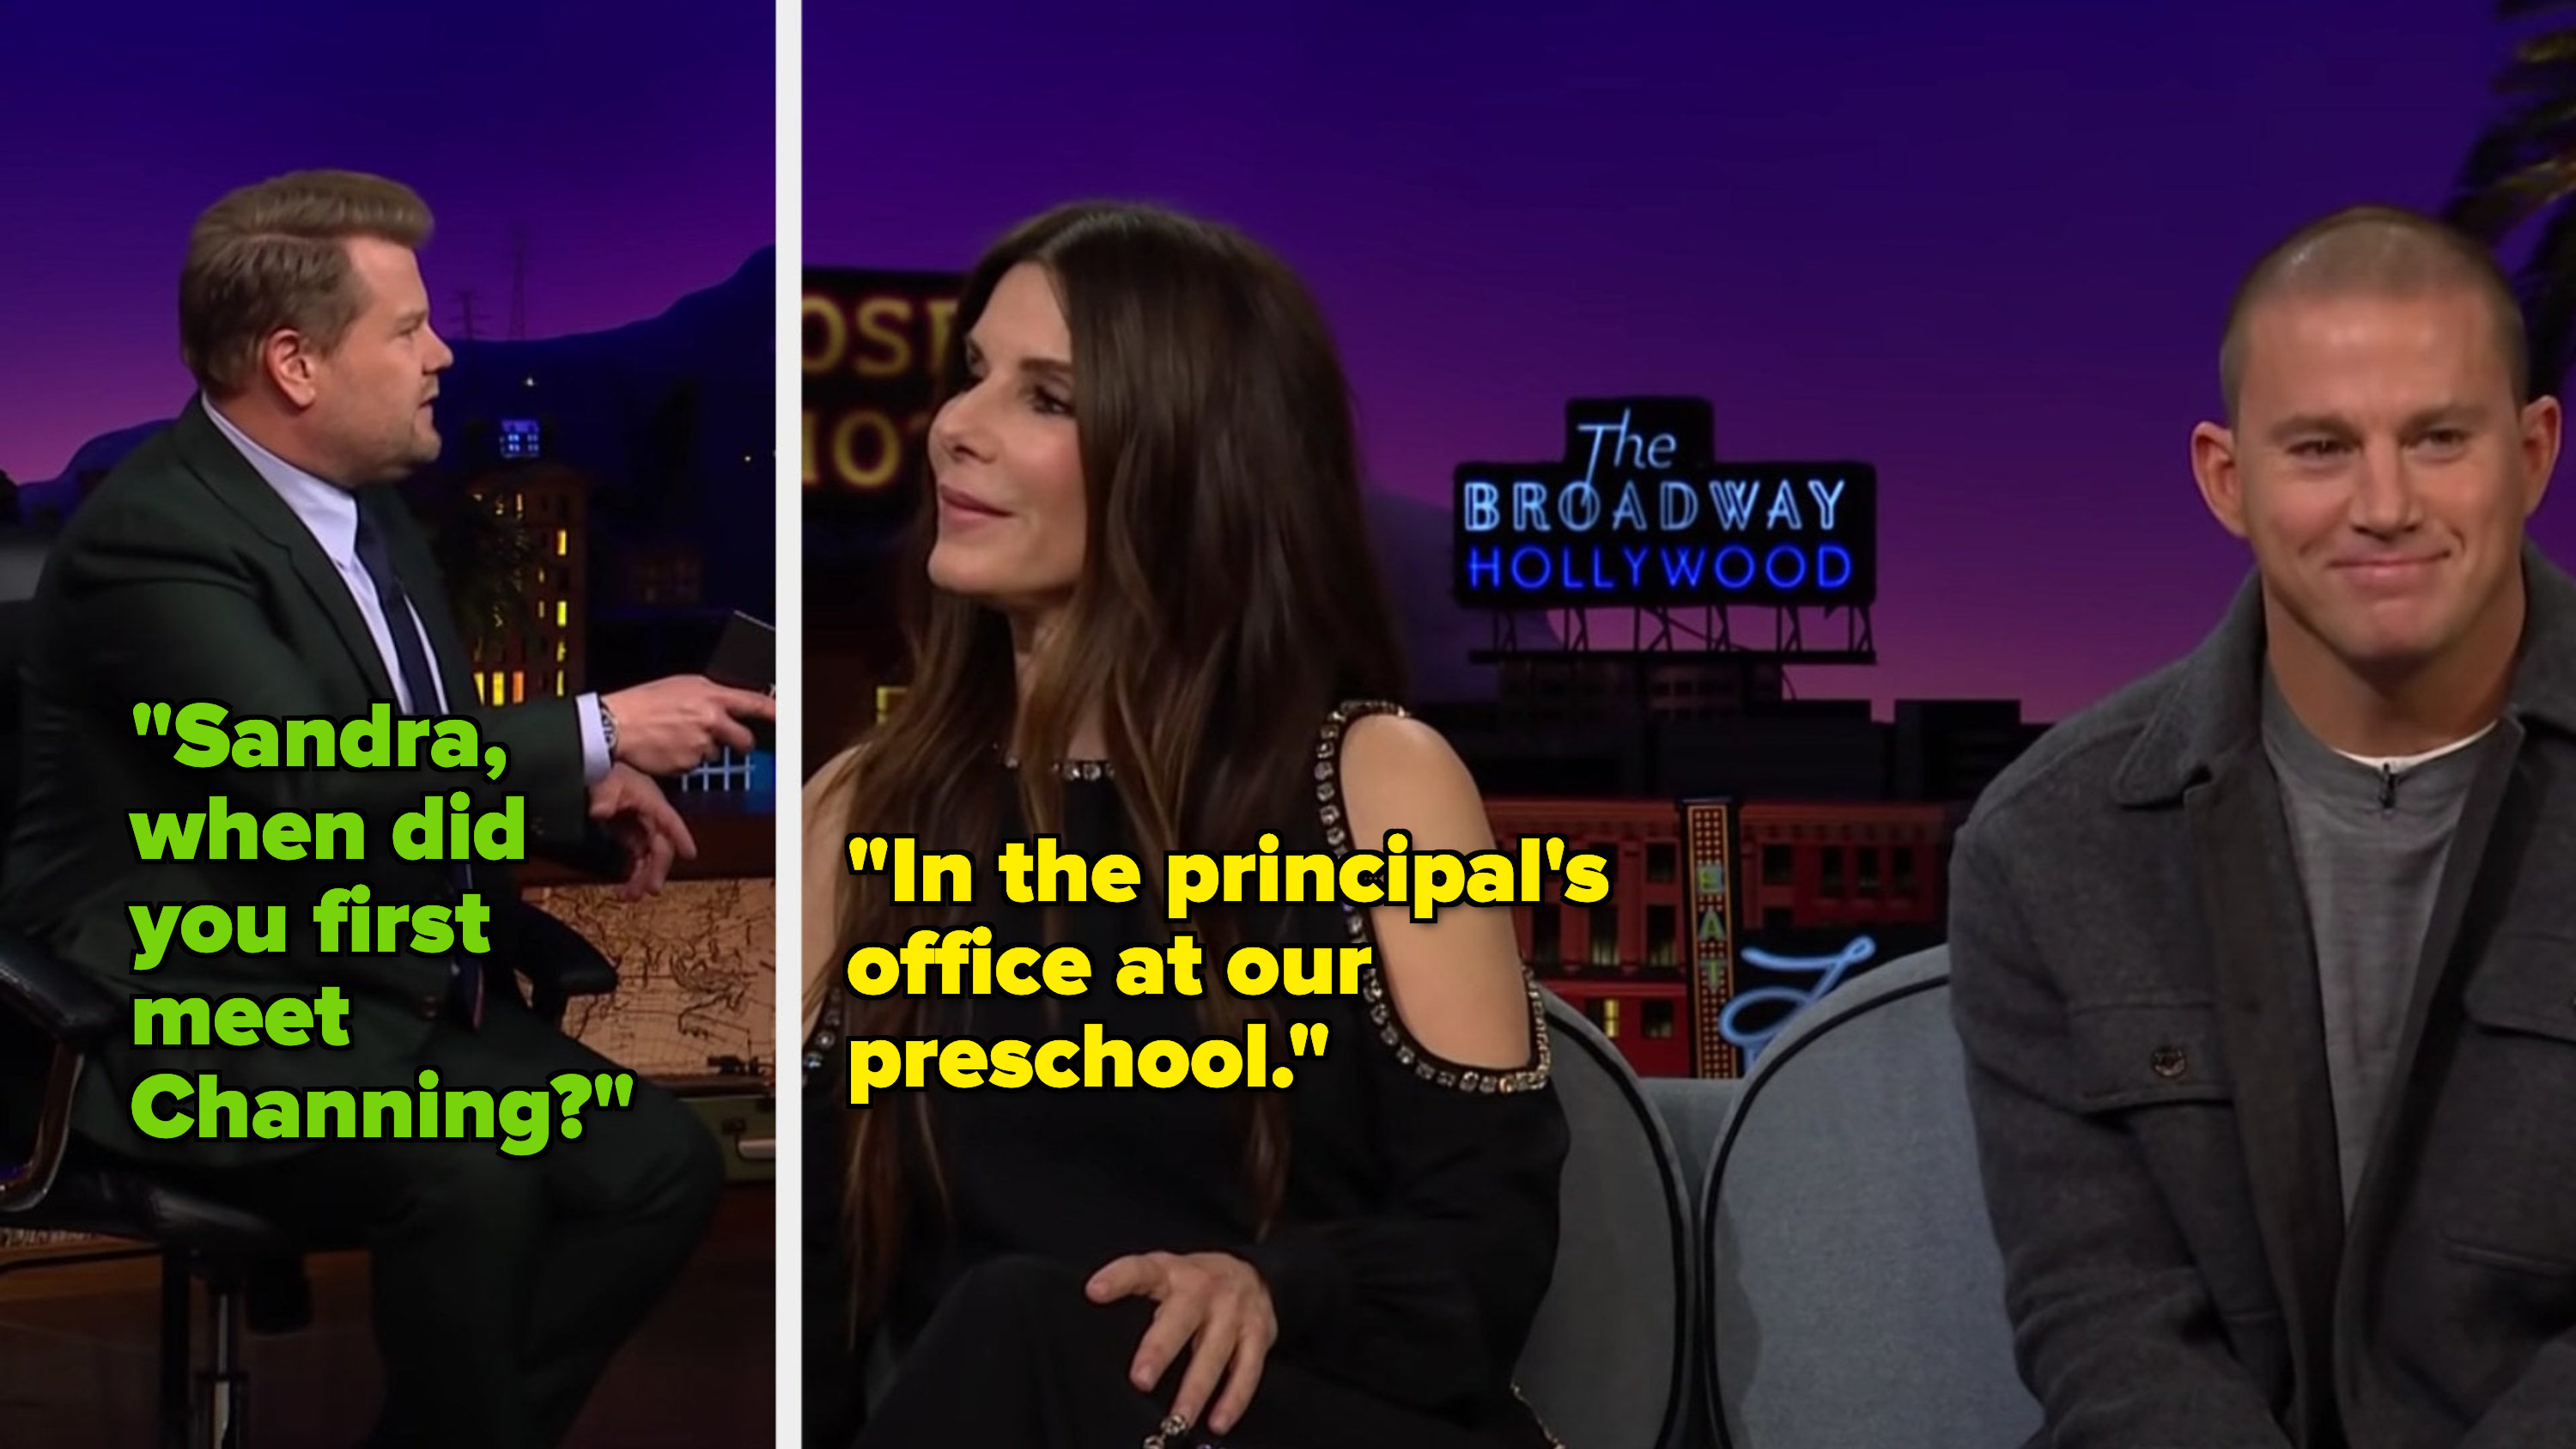 Sandra Bullock states that she and Channing Tatum met when their daughters were arguing in their preschool class